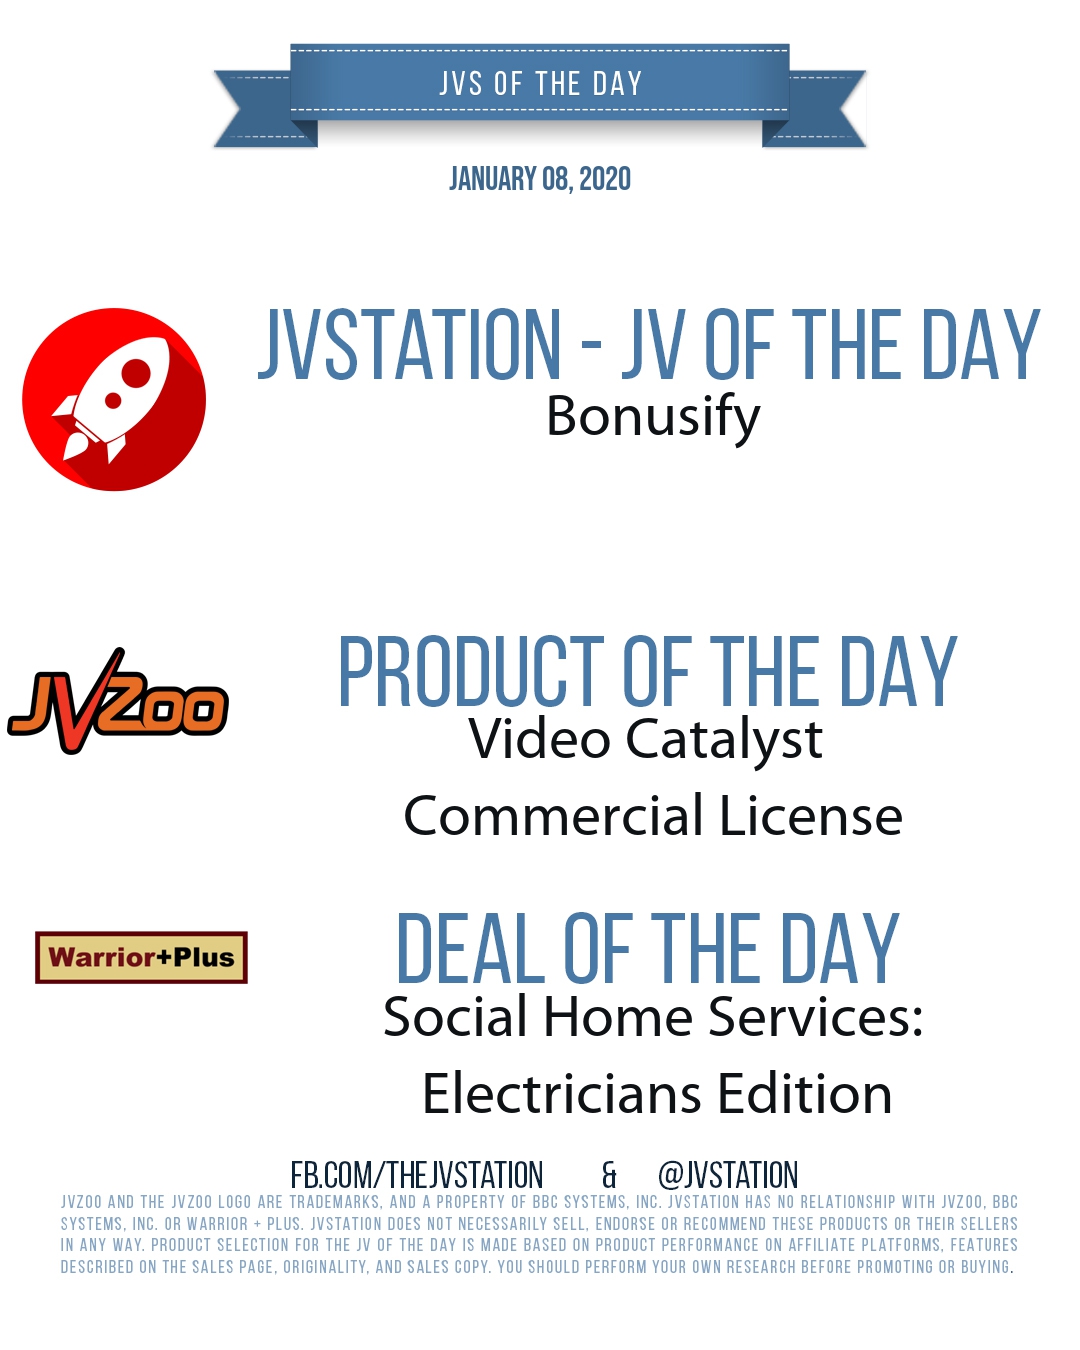 JVs of the day - January 08, 2020